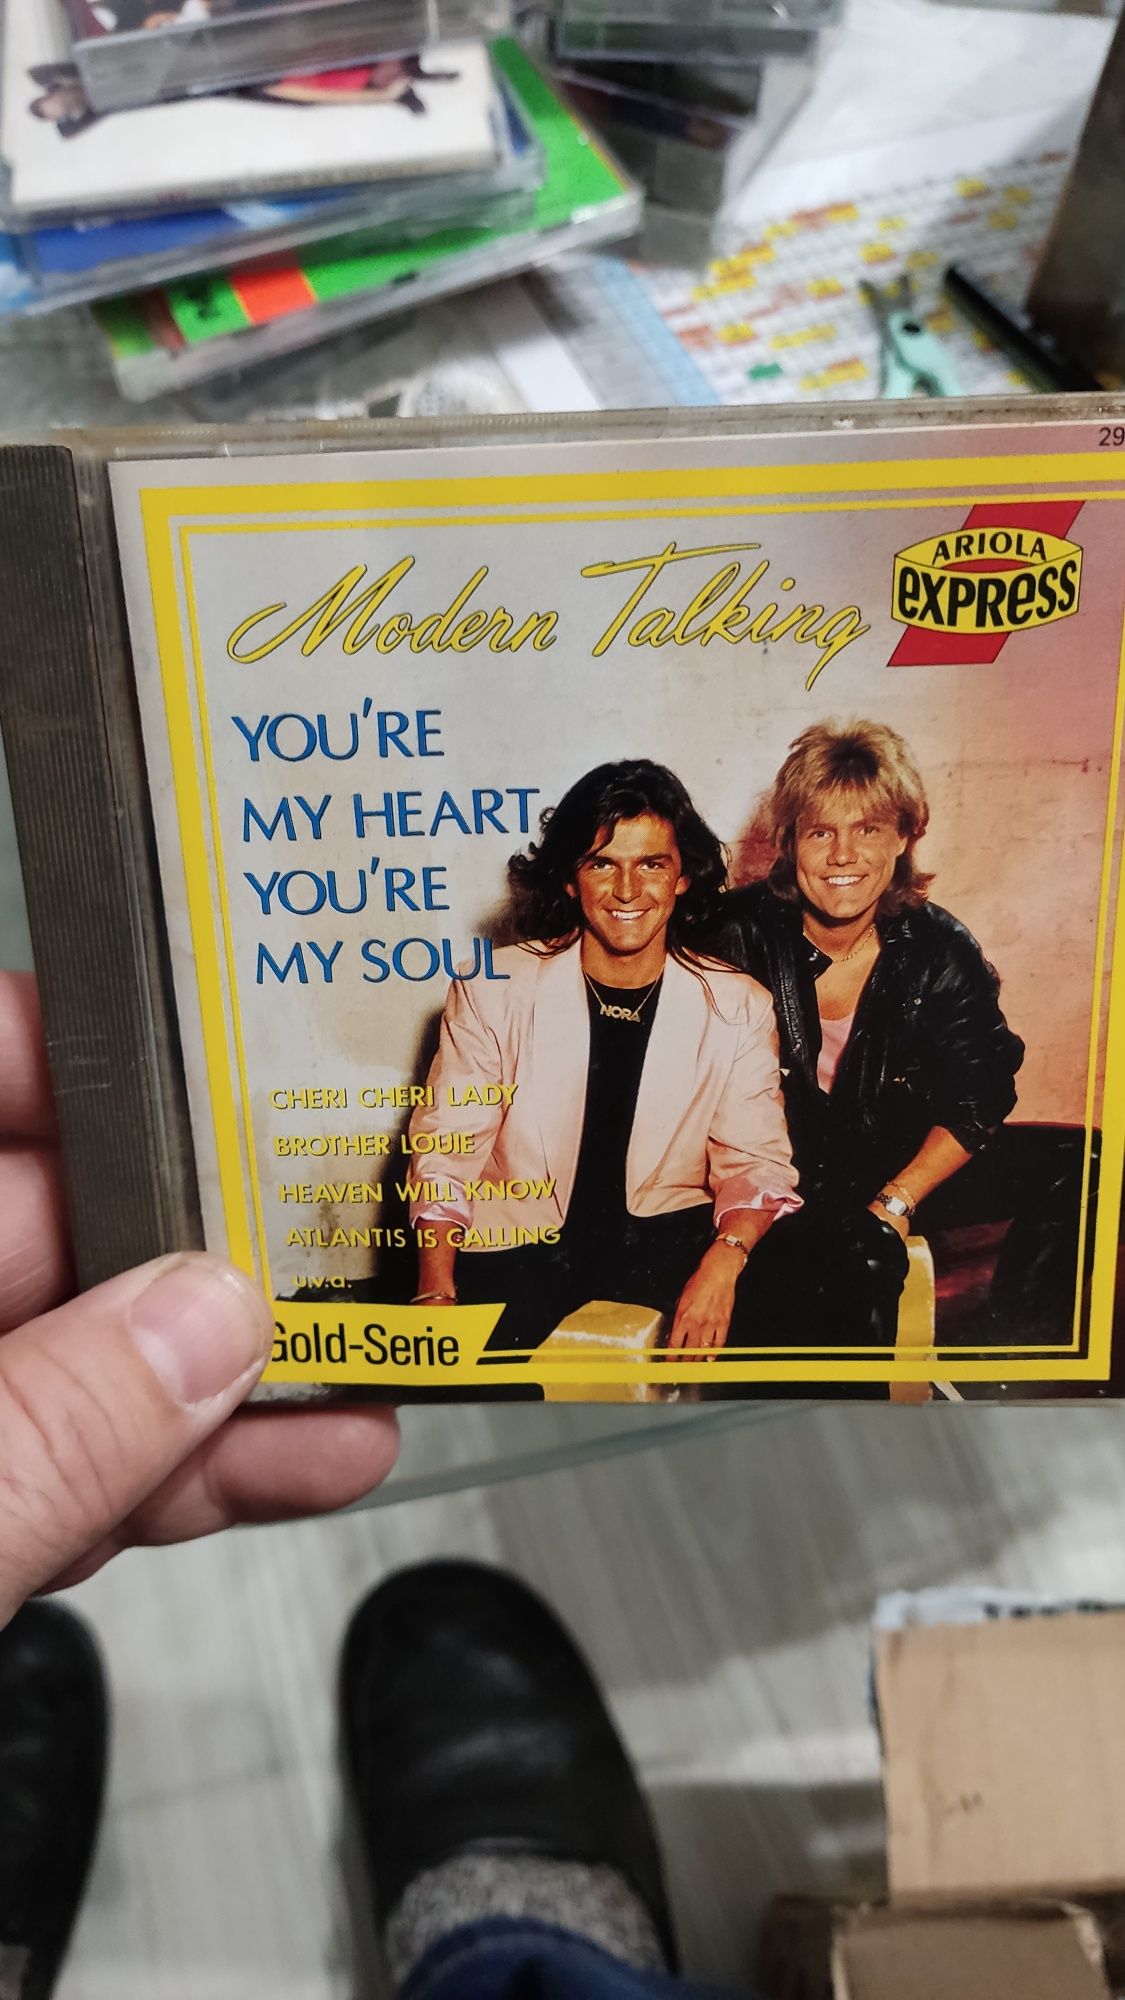 Modern Talking Youre my heart Youre my soul cd